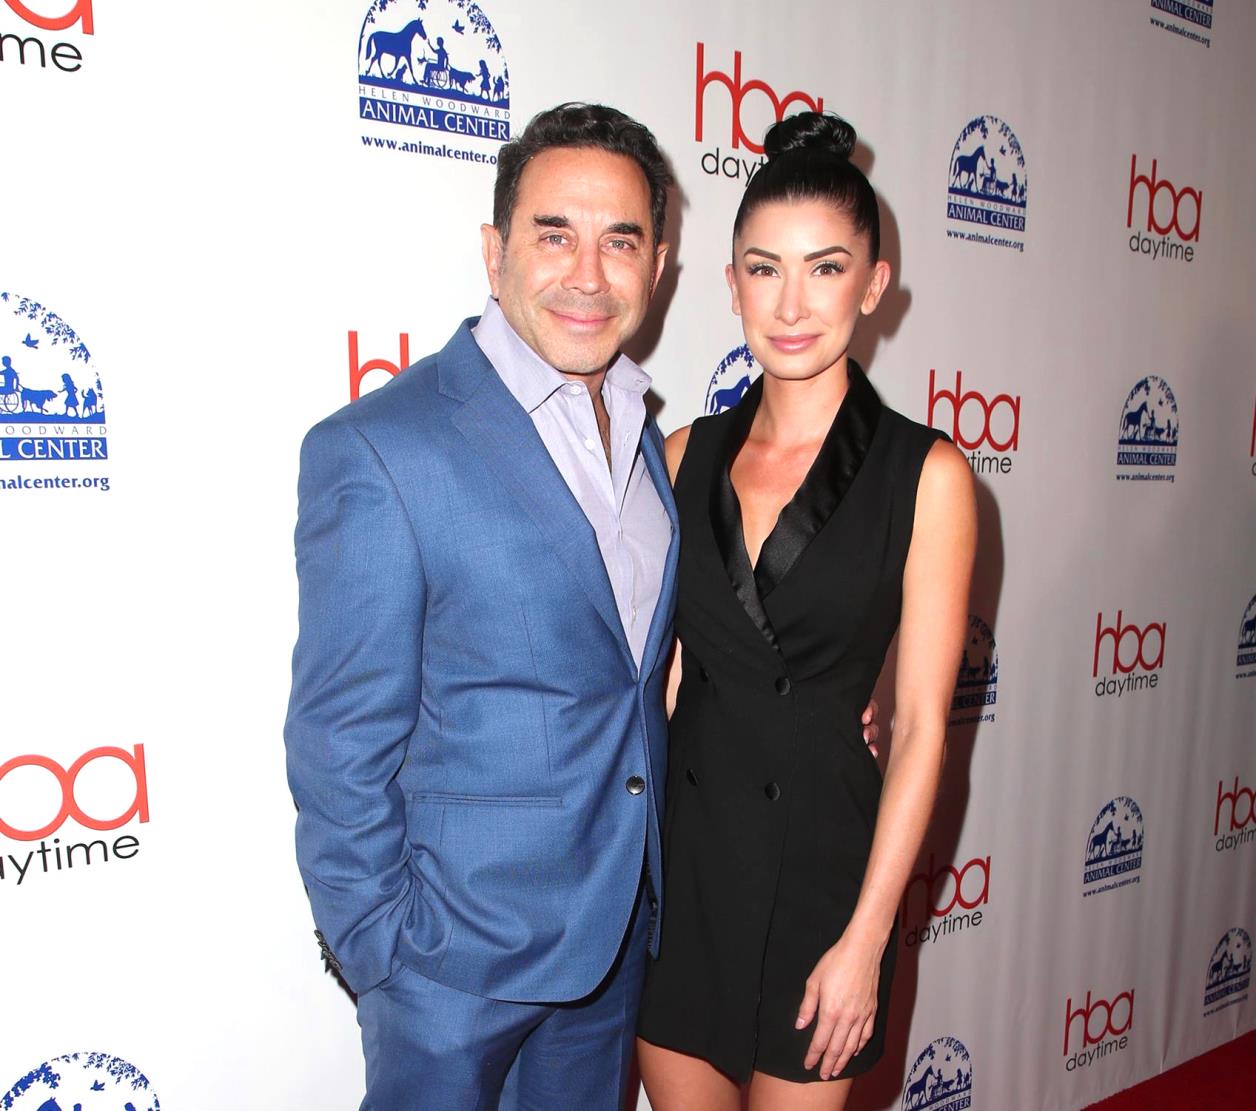 PHOTOS: Former RHOBH Star Paul Nassif is Engaged to Brittany Pattakos! See the Sweet Proposal Pics